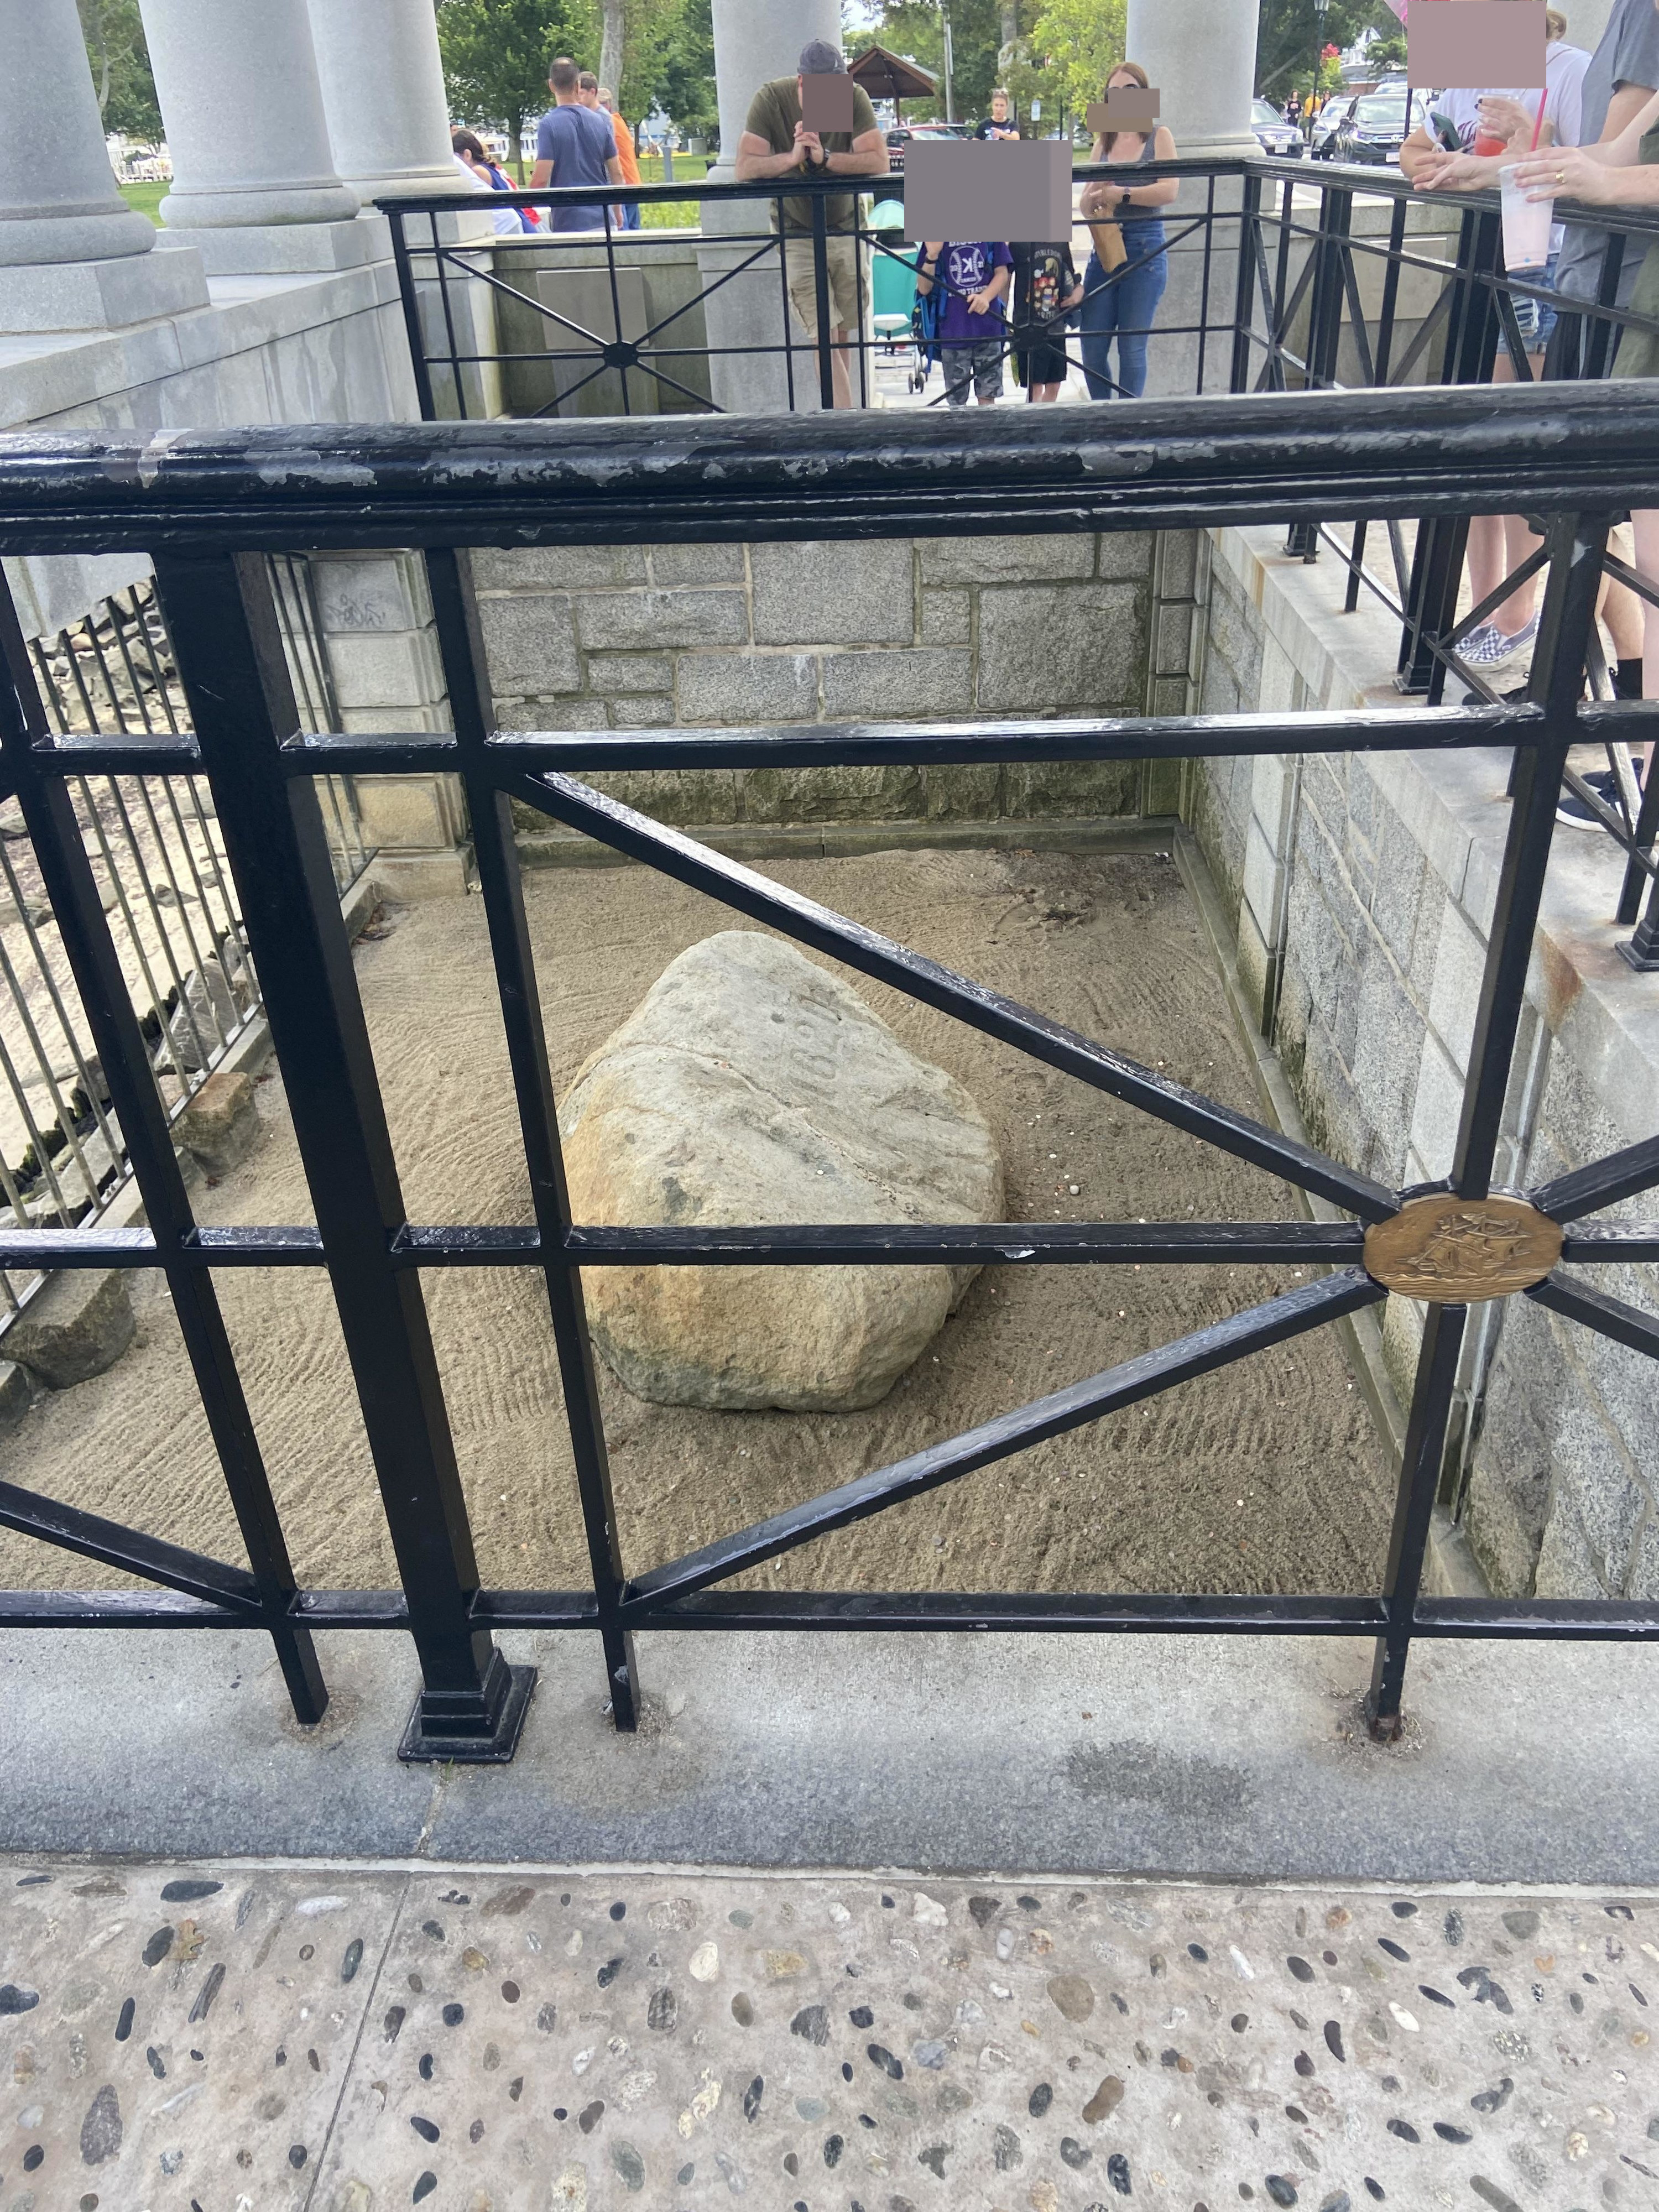 A large but not enormous rock behind bars, with people looking at it